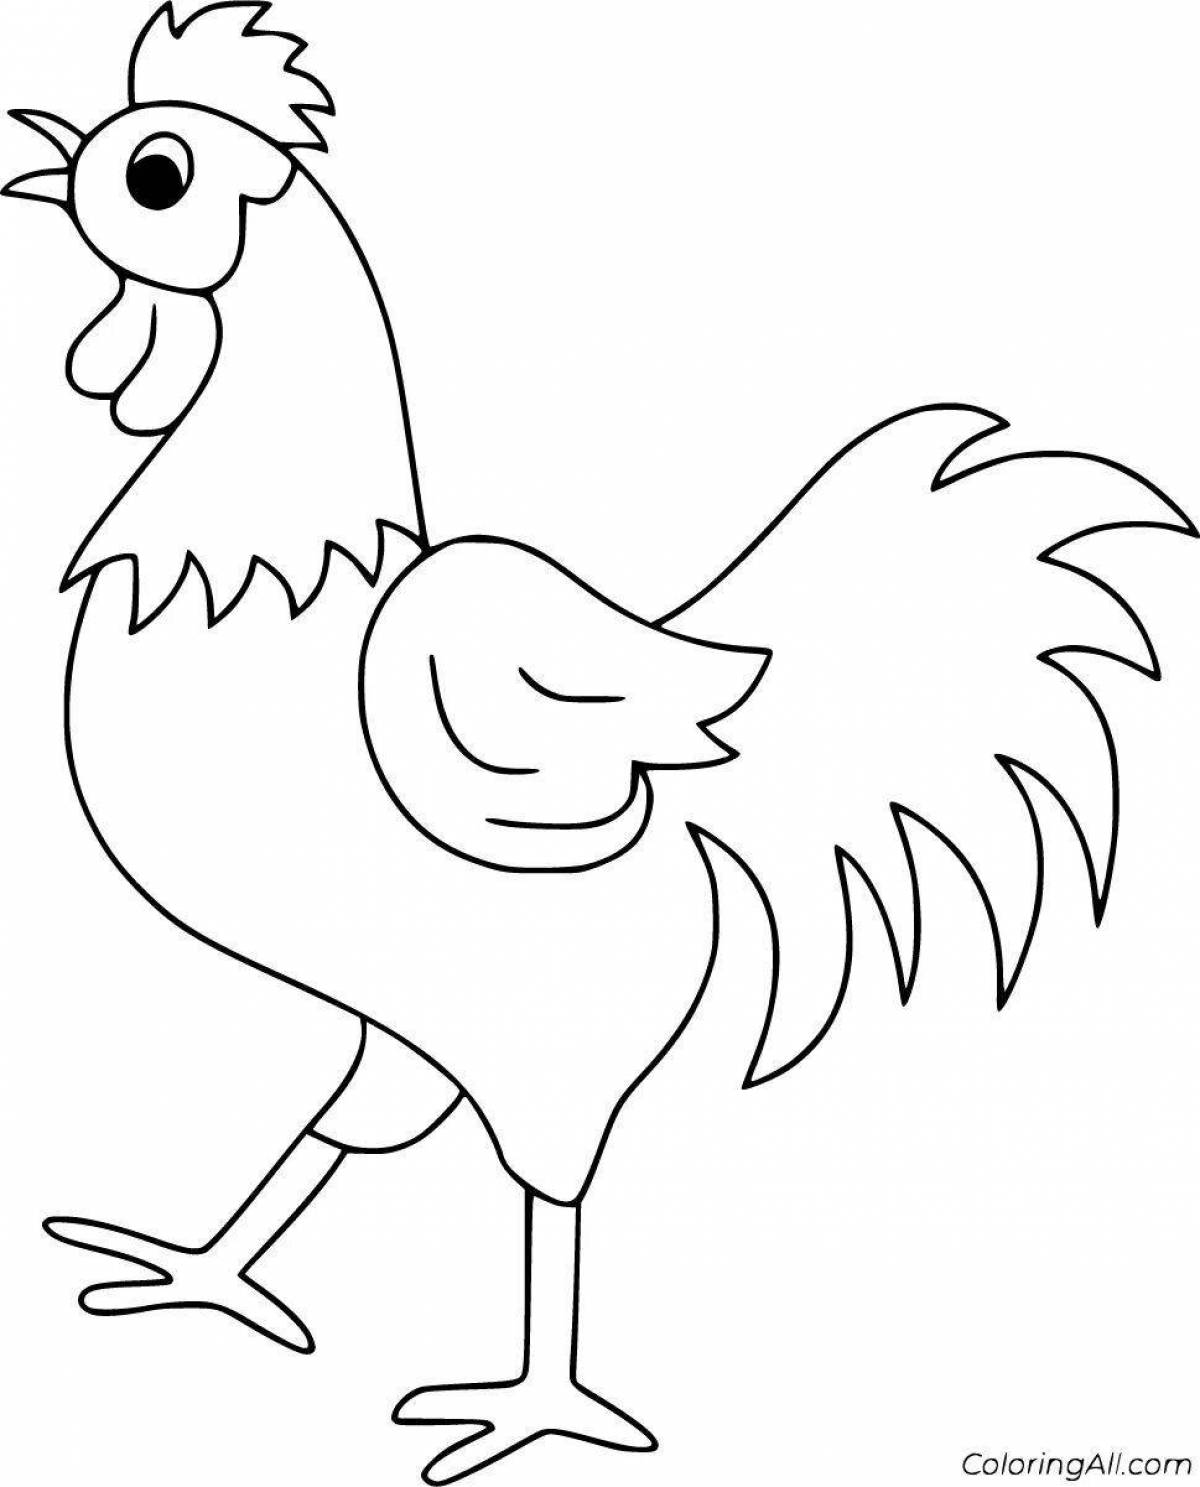 Rooster coloring book for kids